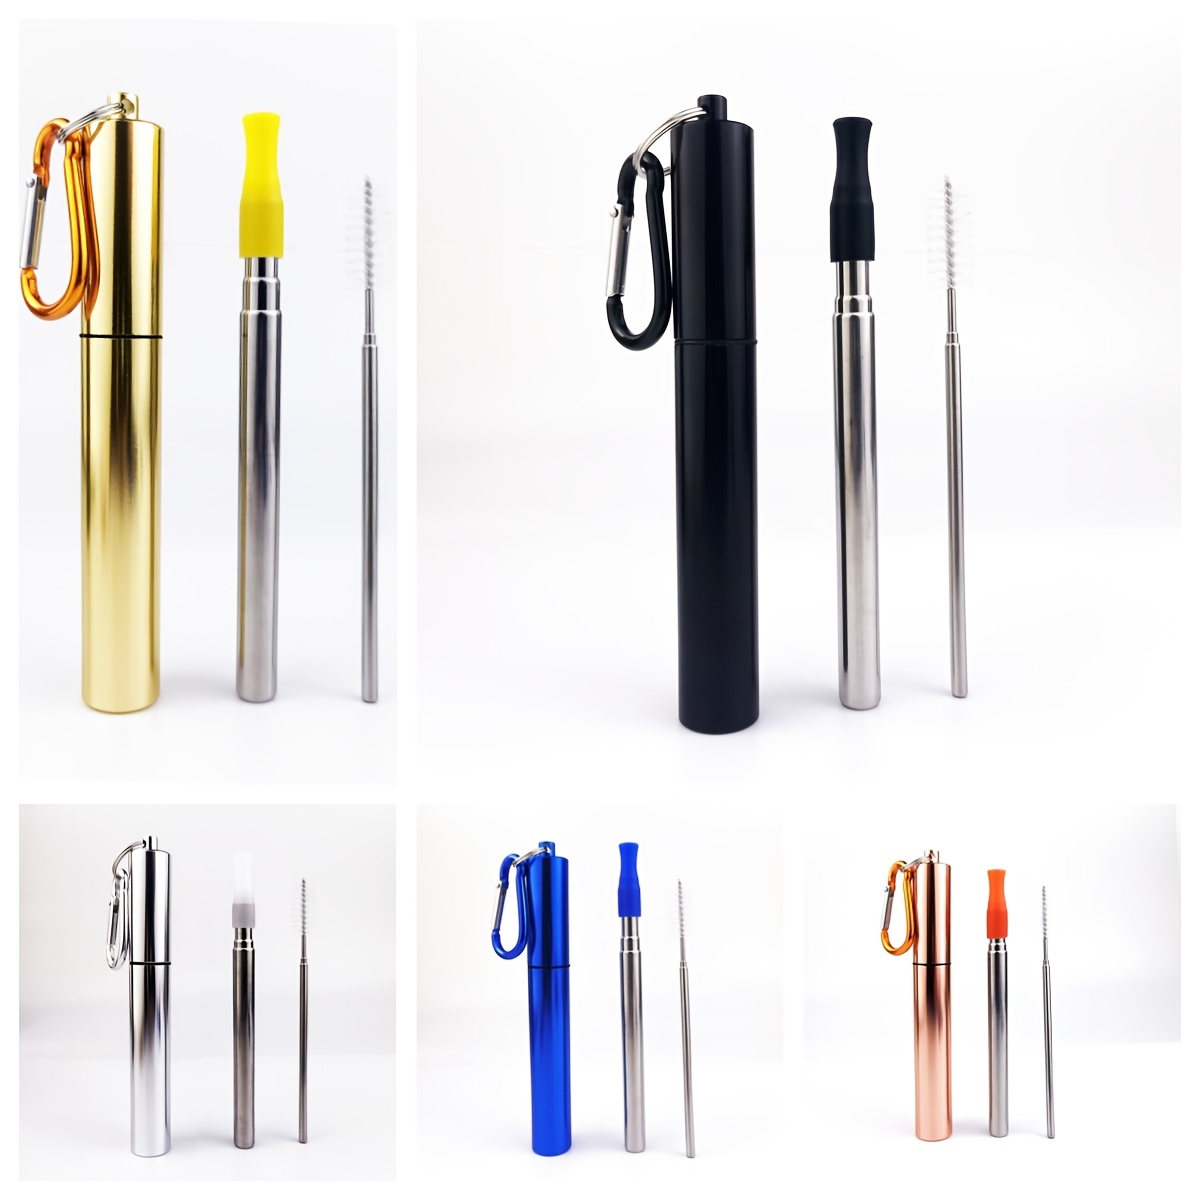 Colorful Stainless Steel Telescopic Extendable Metal Straw Set For